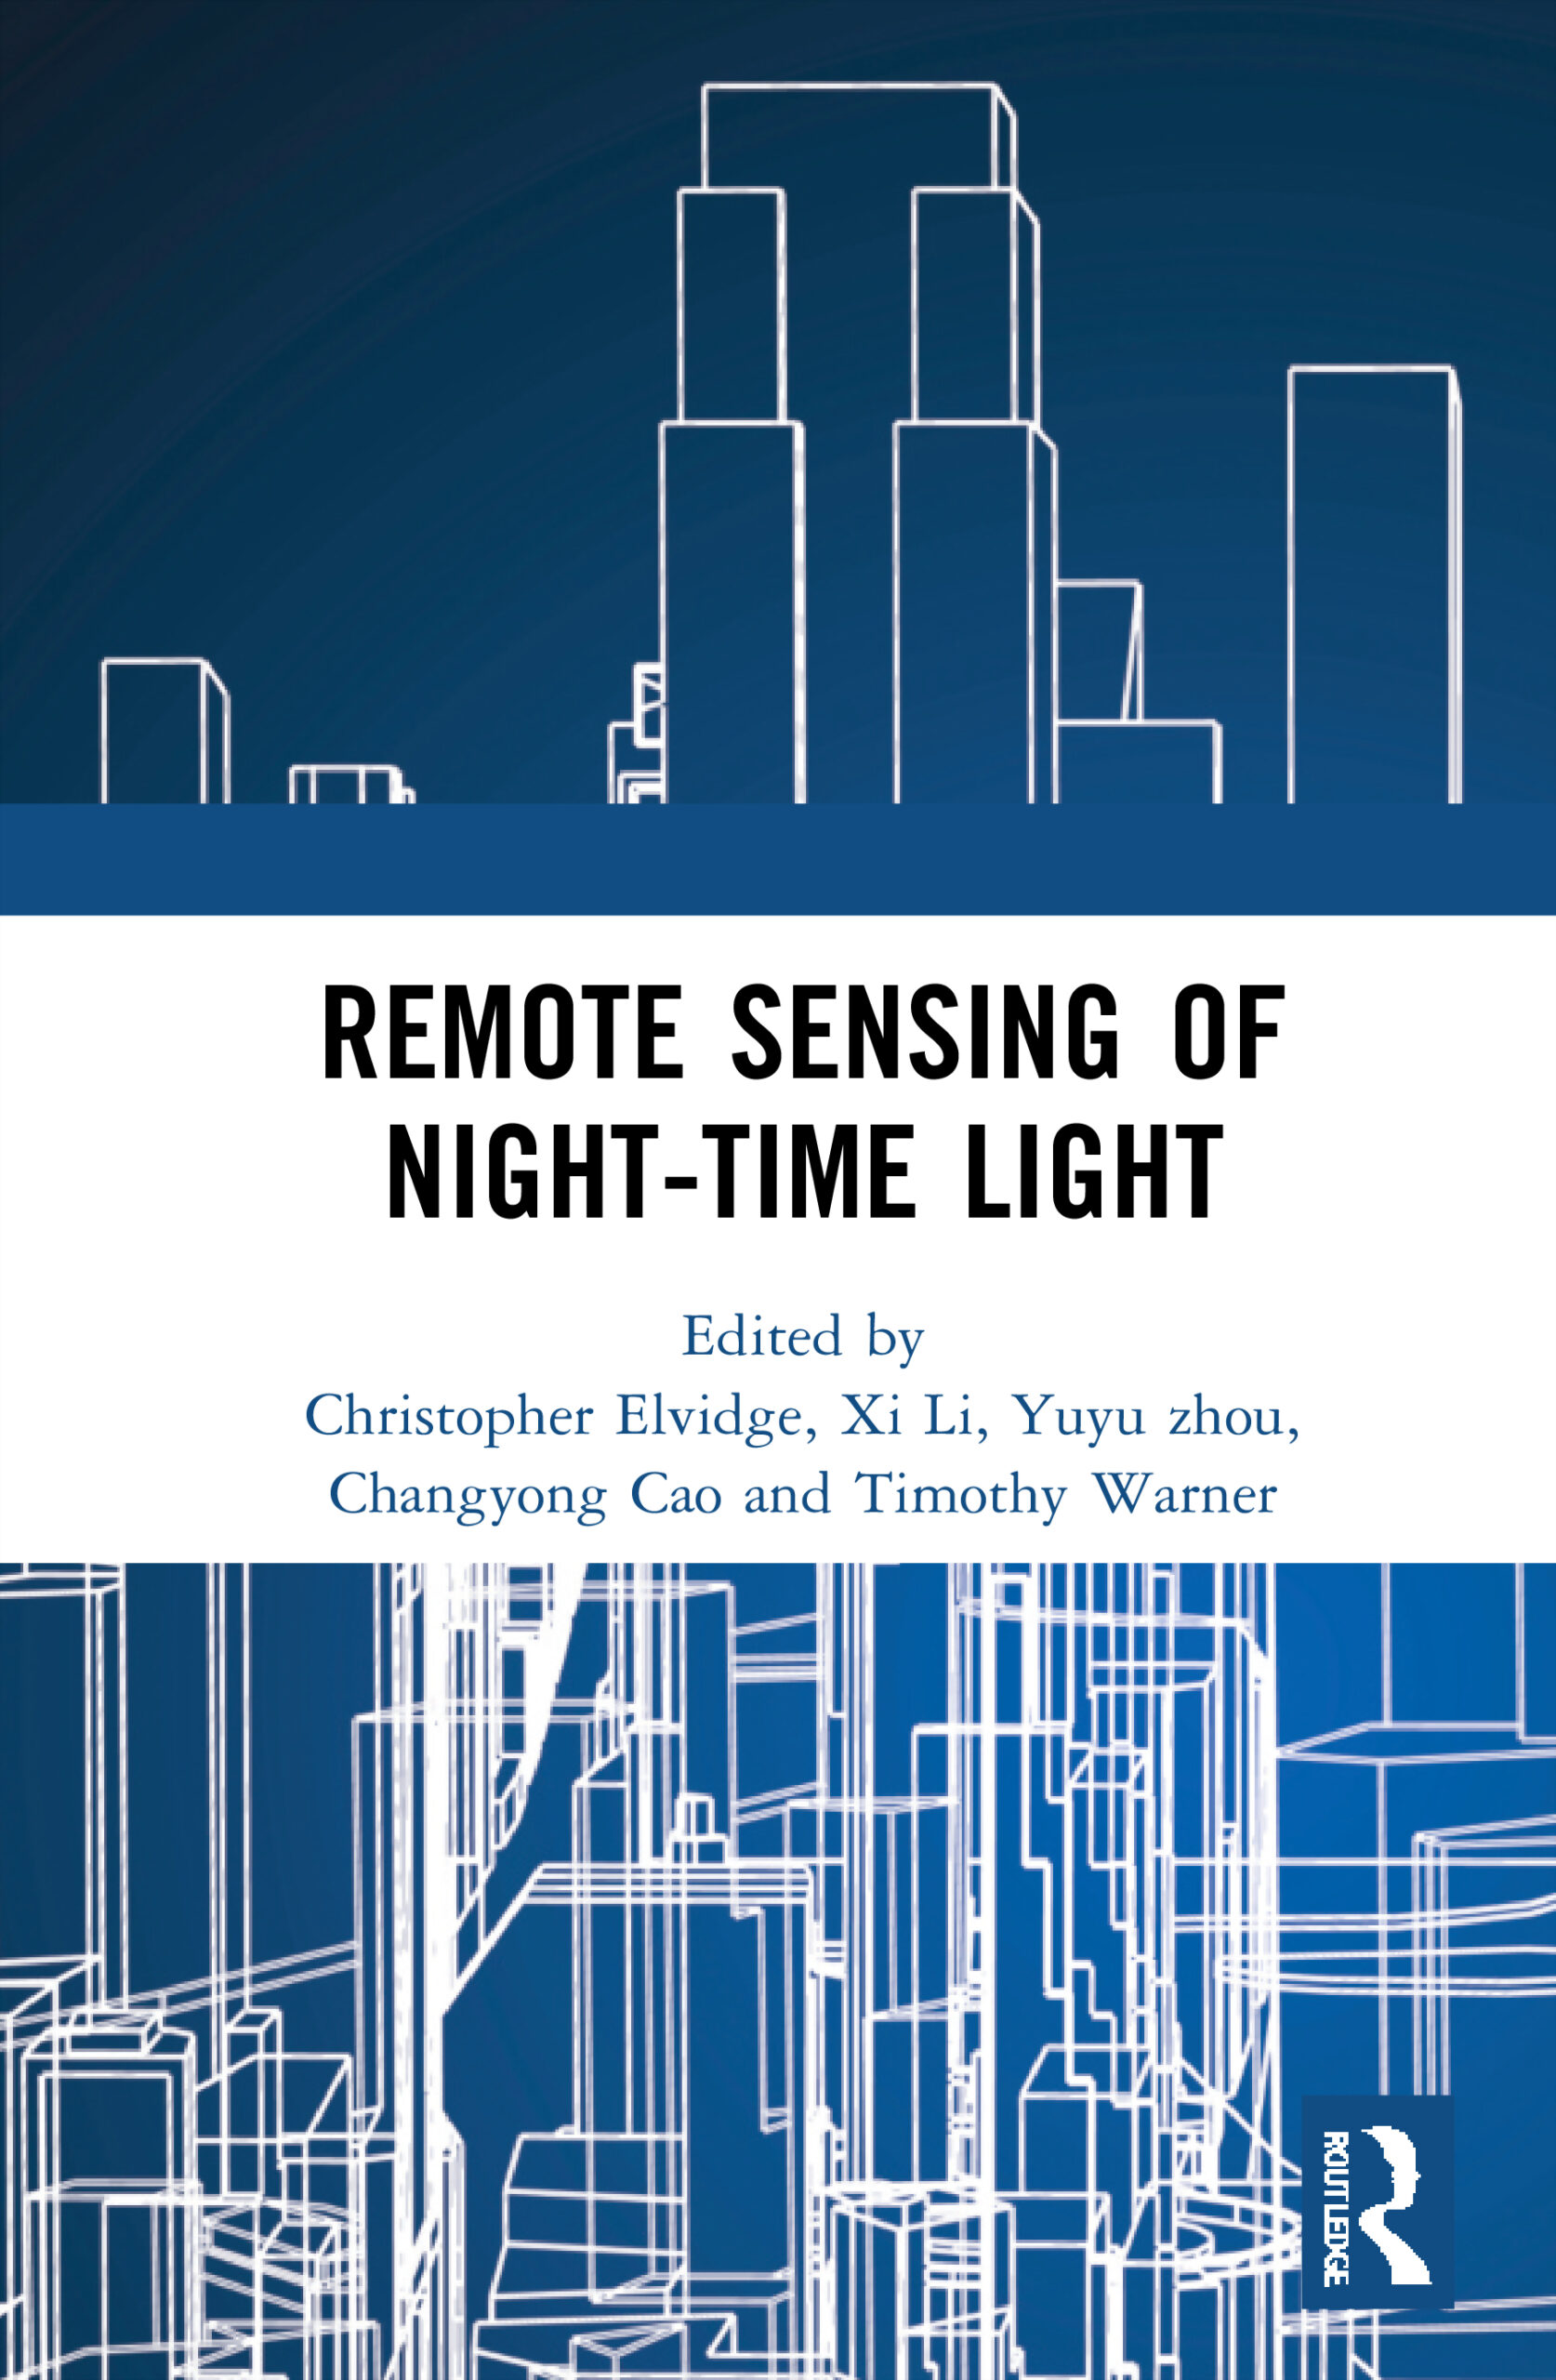 The book cover, which depicts a blue cityscape and the title, "Remote Sensing of Night-time Light"